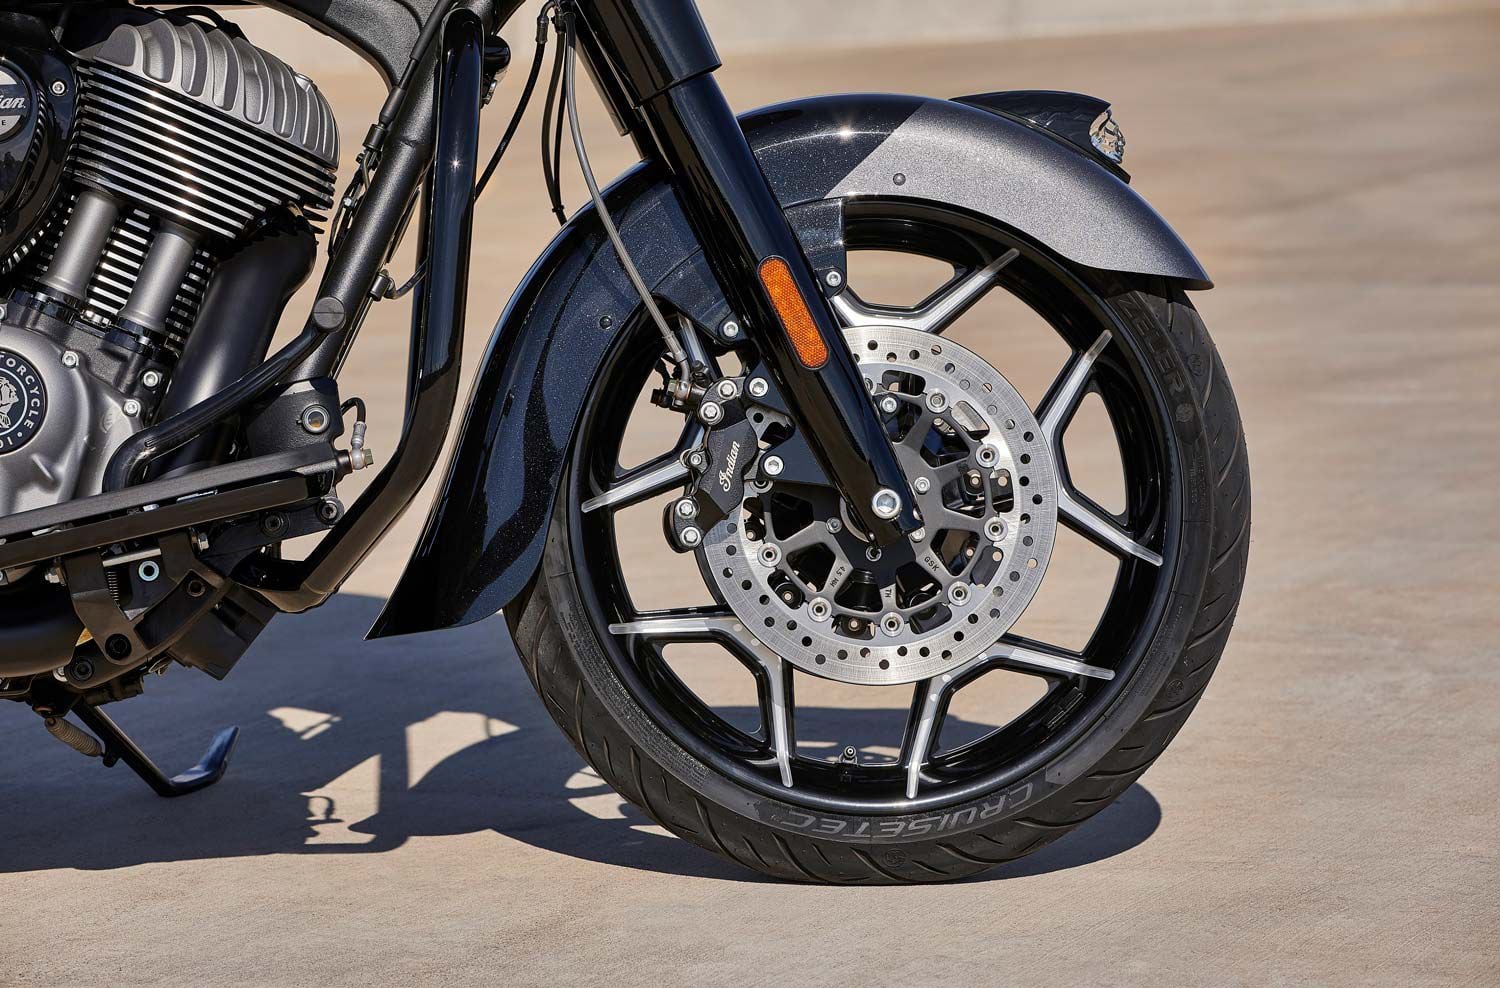 The 10-spoke machined contrast-cut design is said to make the wheel look even bigger under that open fender.